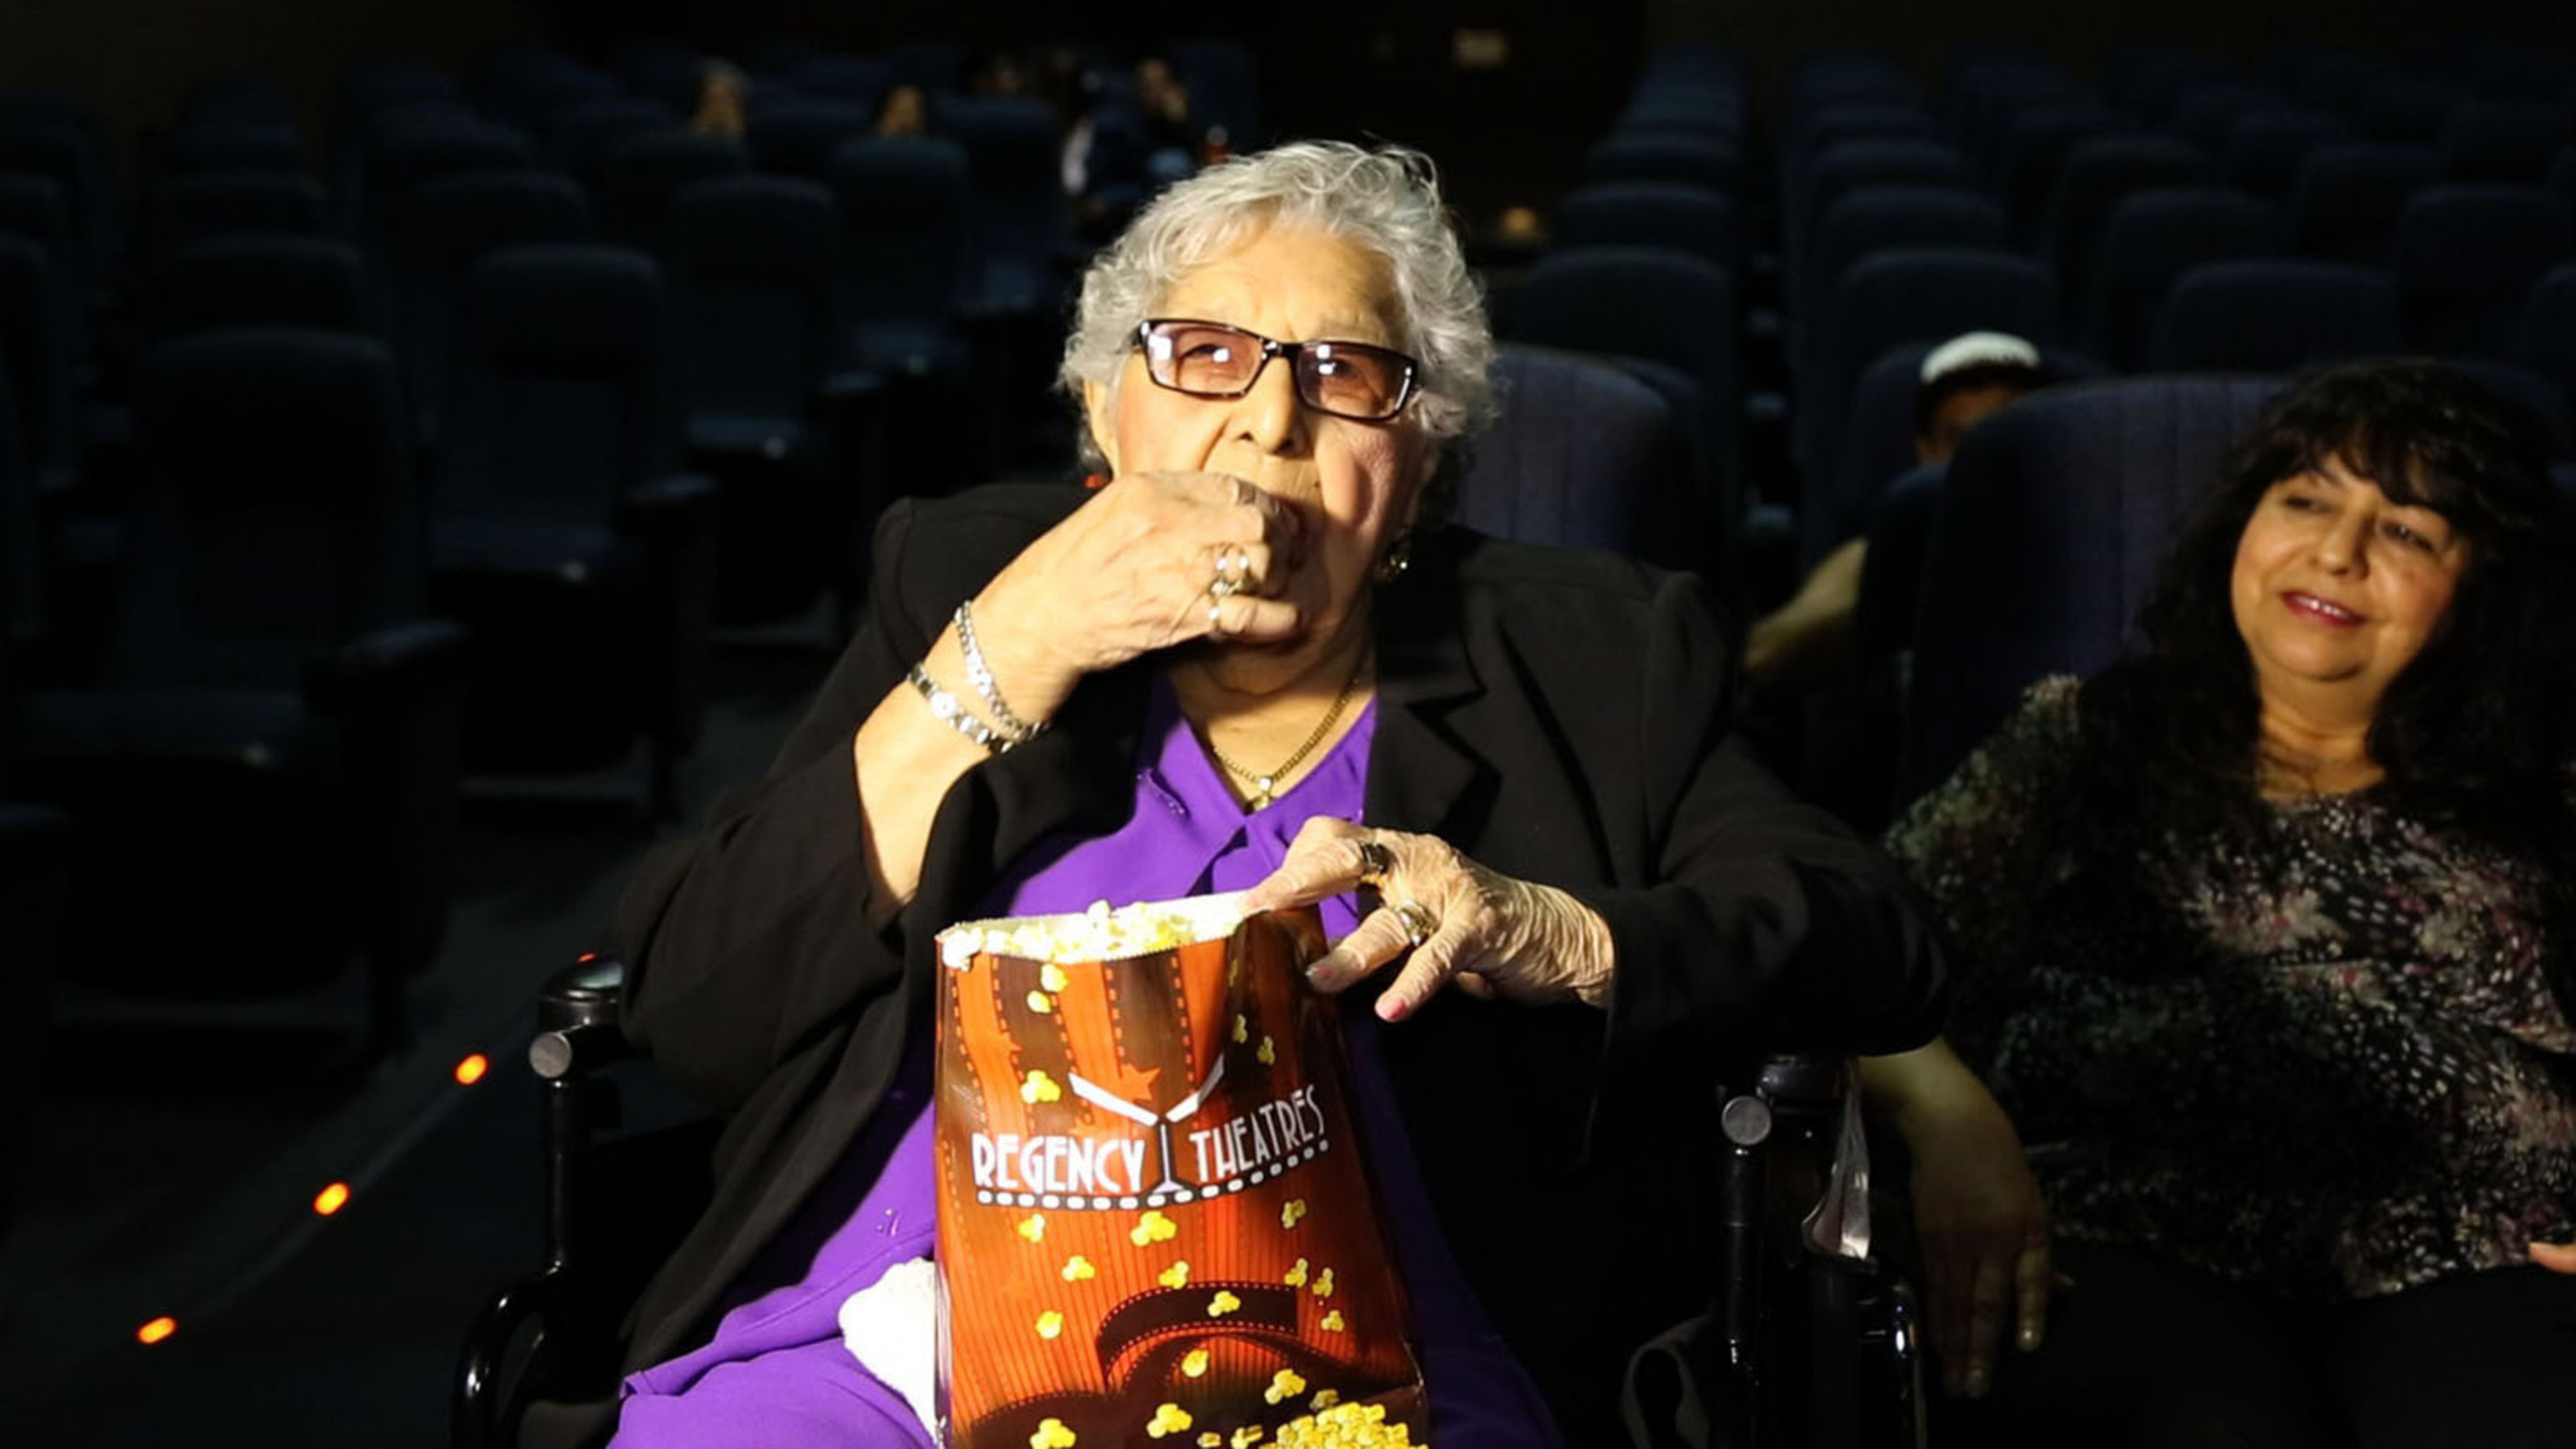 A 100-year-old woman is inspired to attend a theater for the first time ever (PRNewsFoto/Arenas Entertainment)